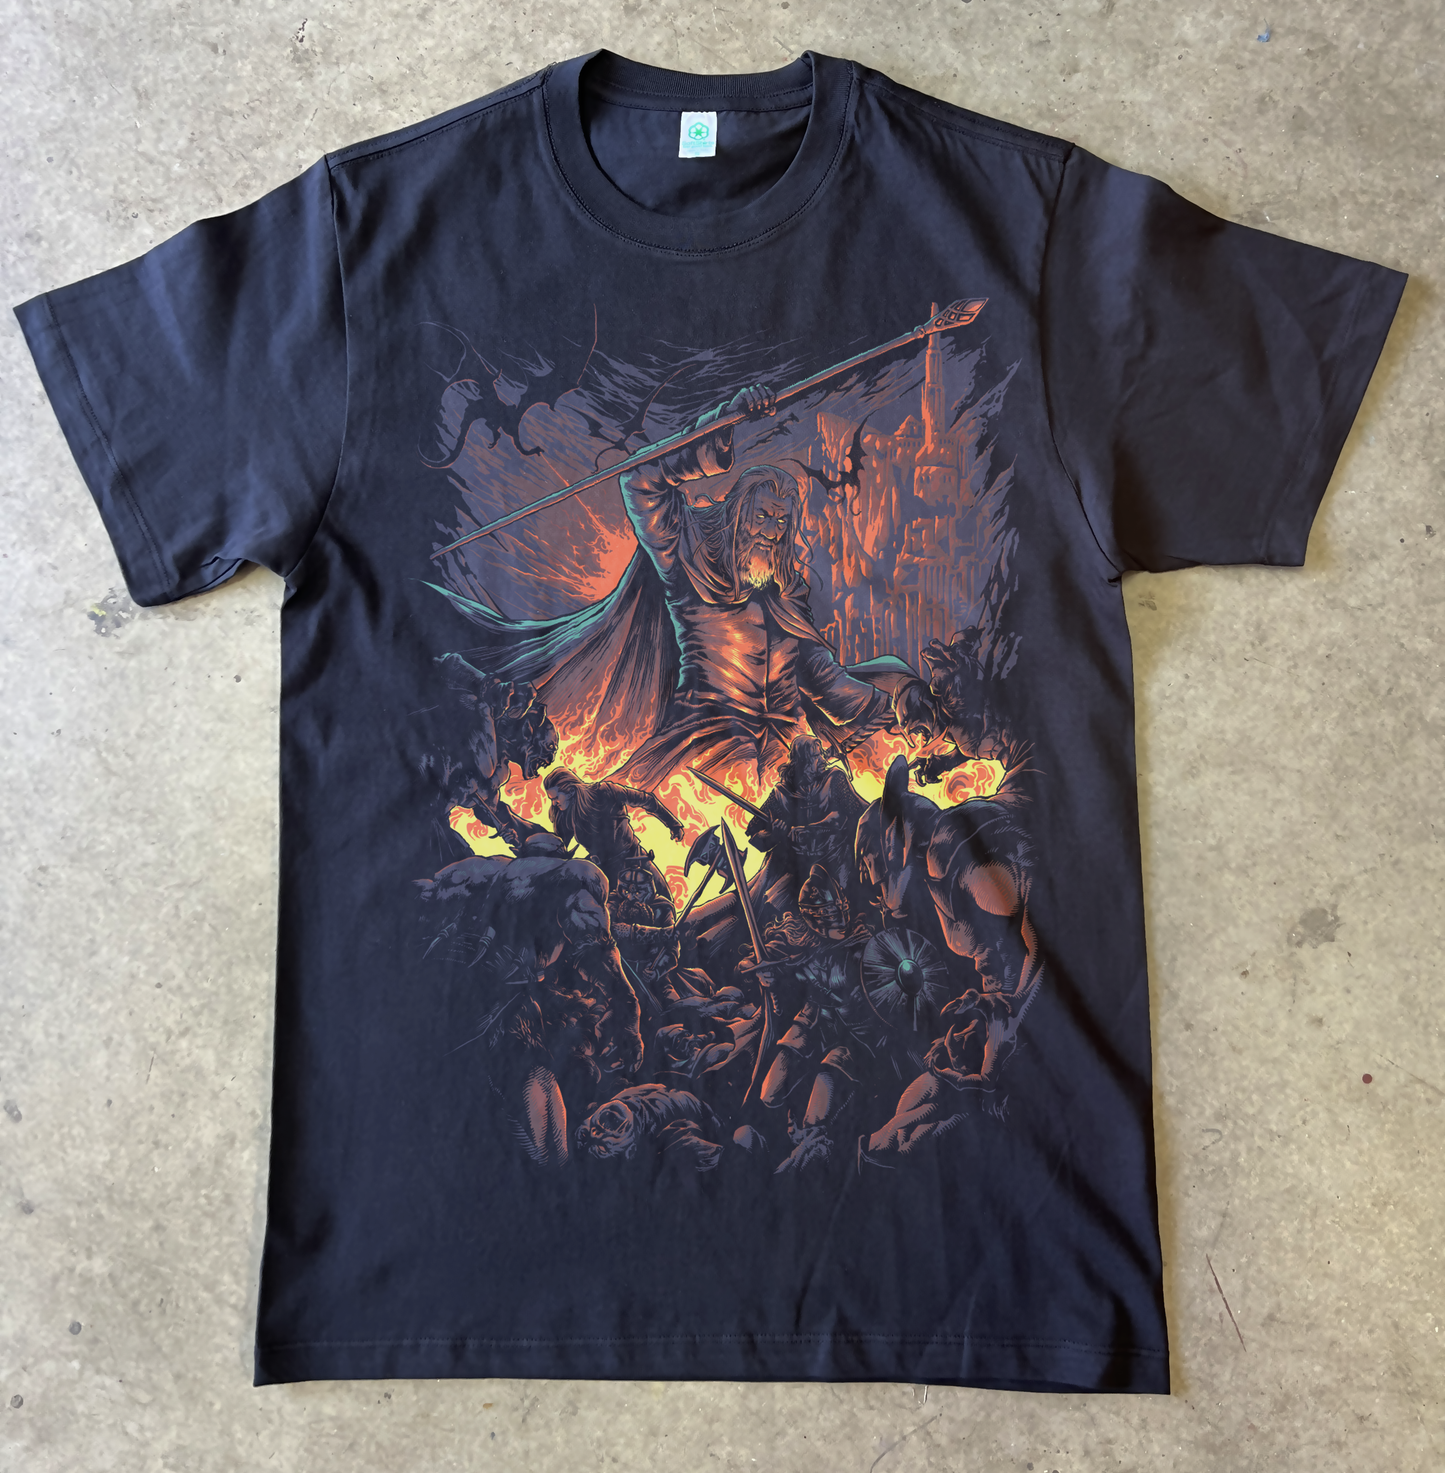 “In this hour, I do not believe that any darkness will endure.” Soft Shirt